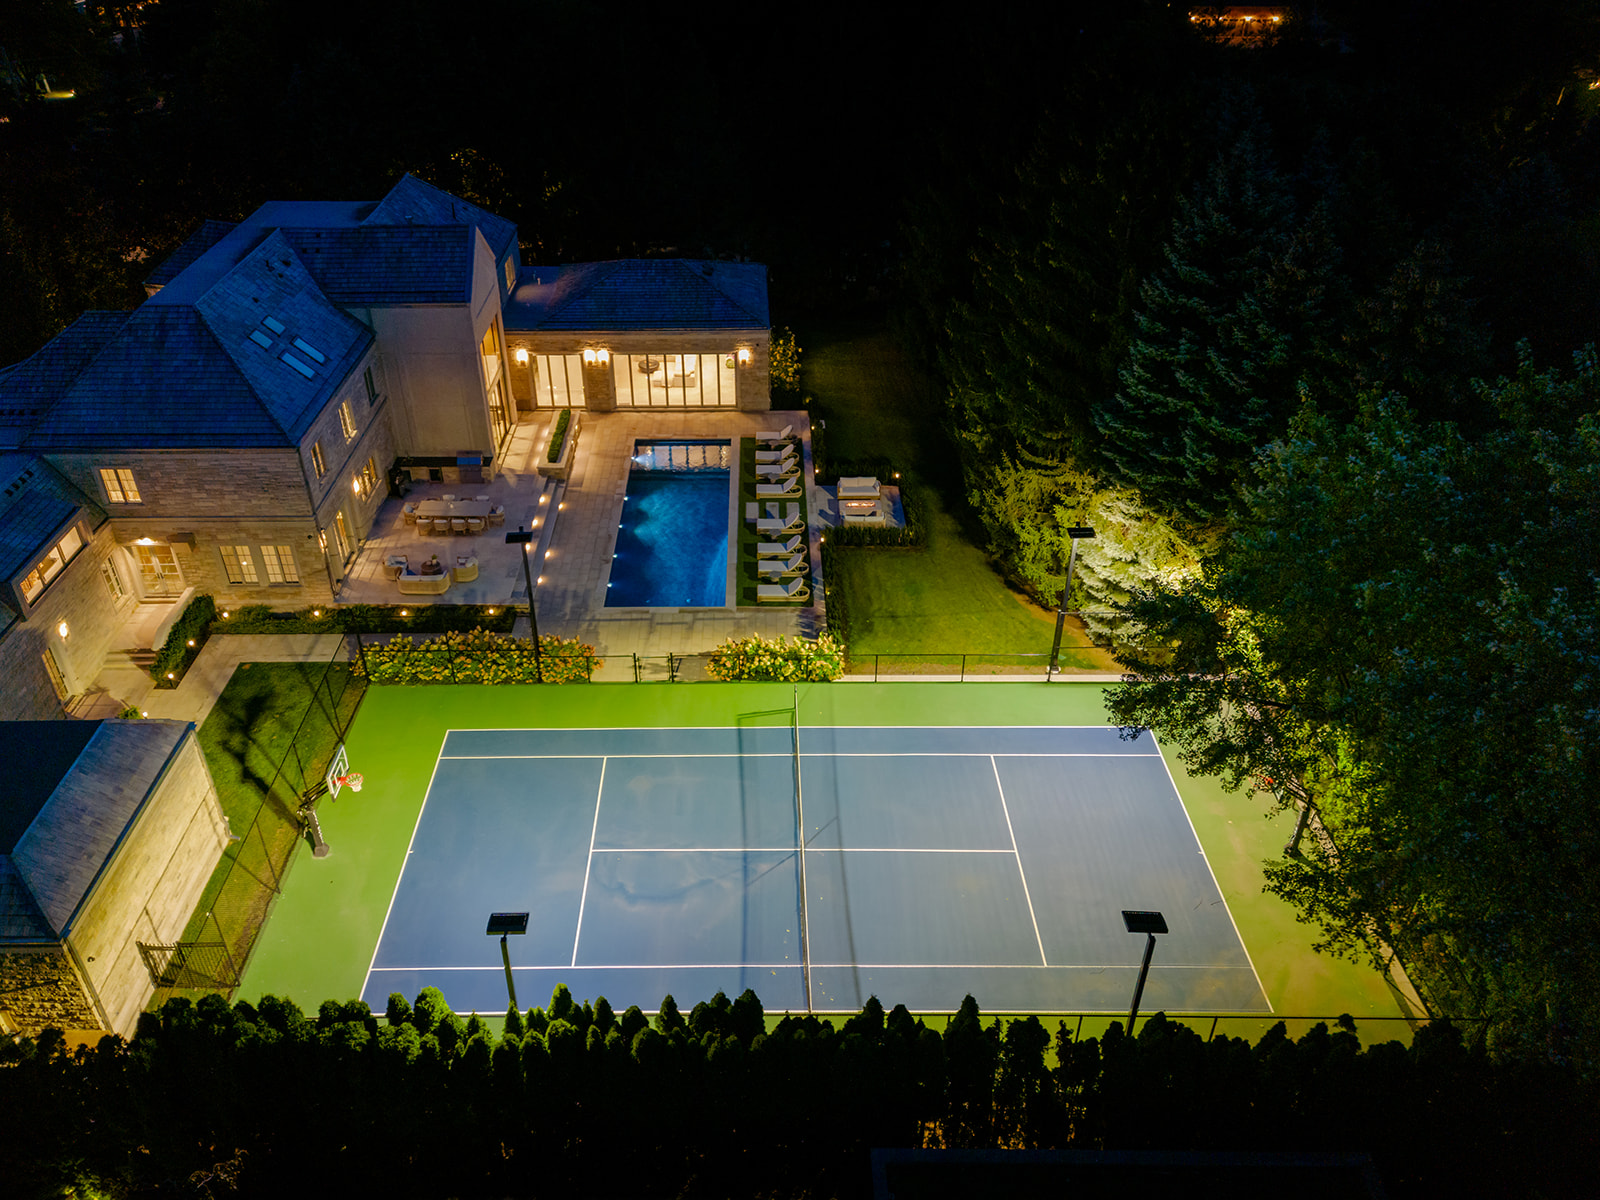 A done-shot of the backyard with the  tennis court lit up.